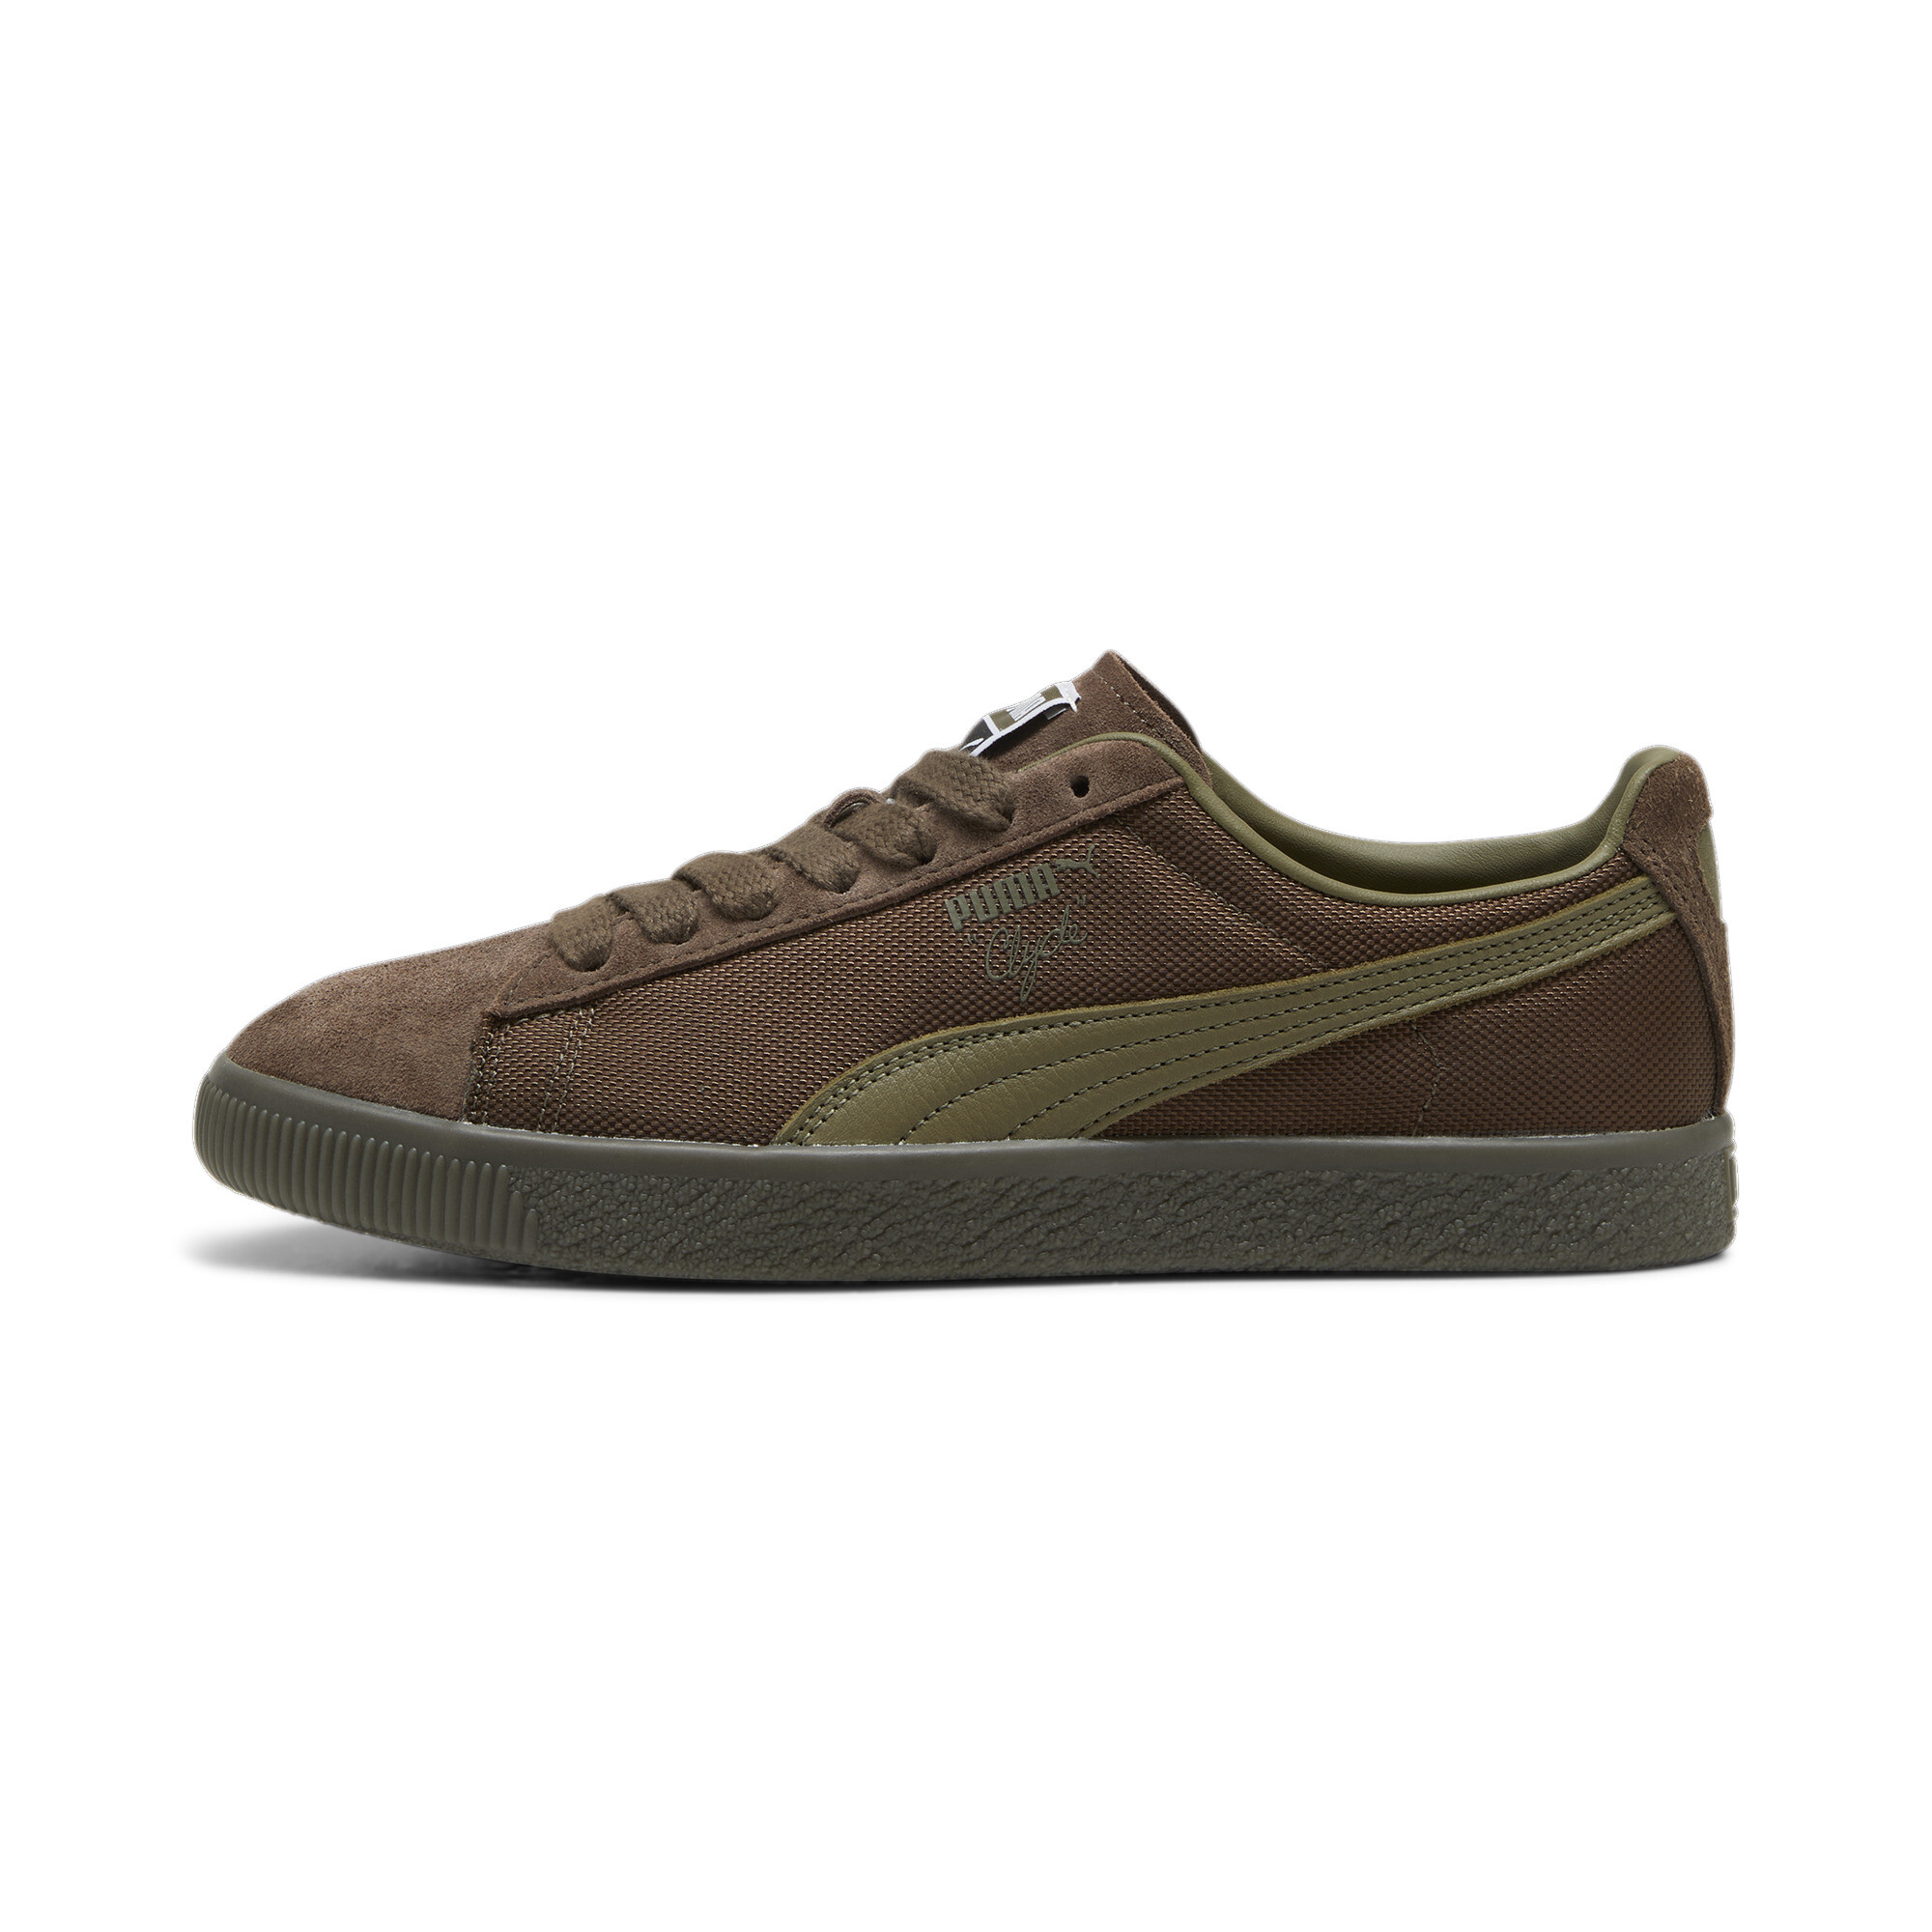 Puma Clyde Soph Sneakers, Brown, Size 48, Shoes